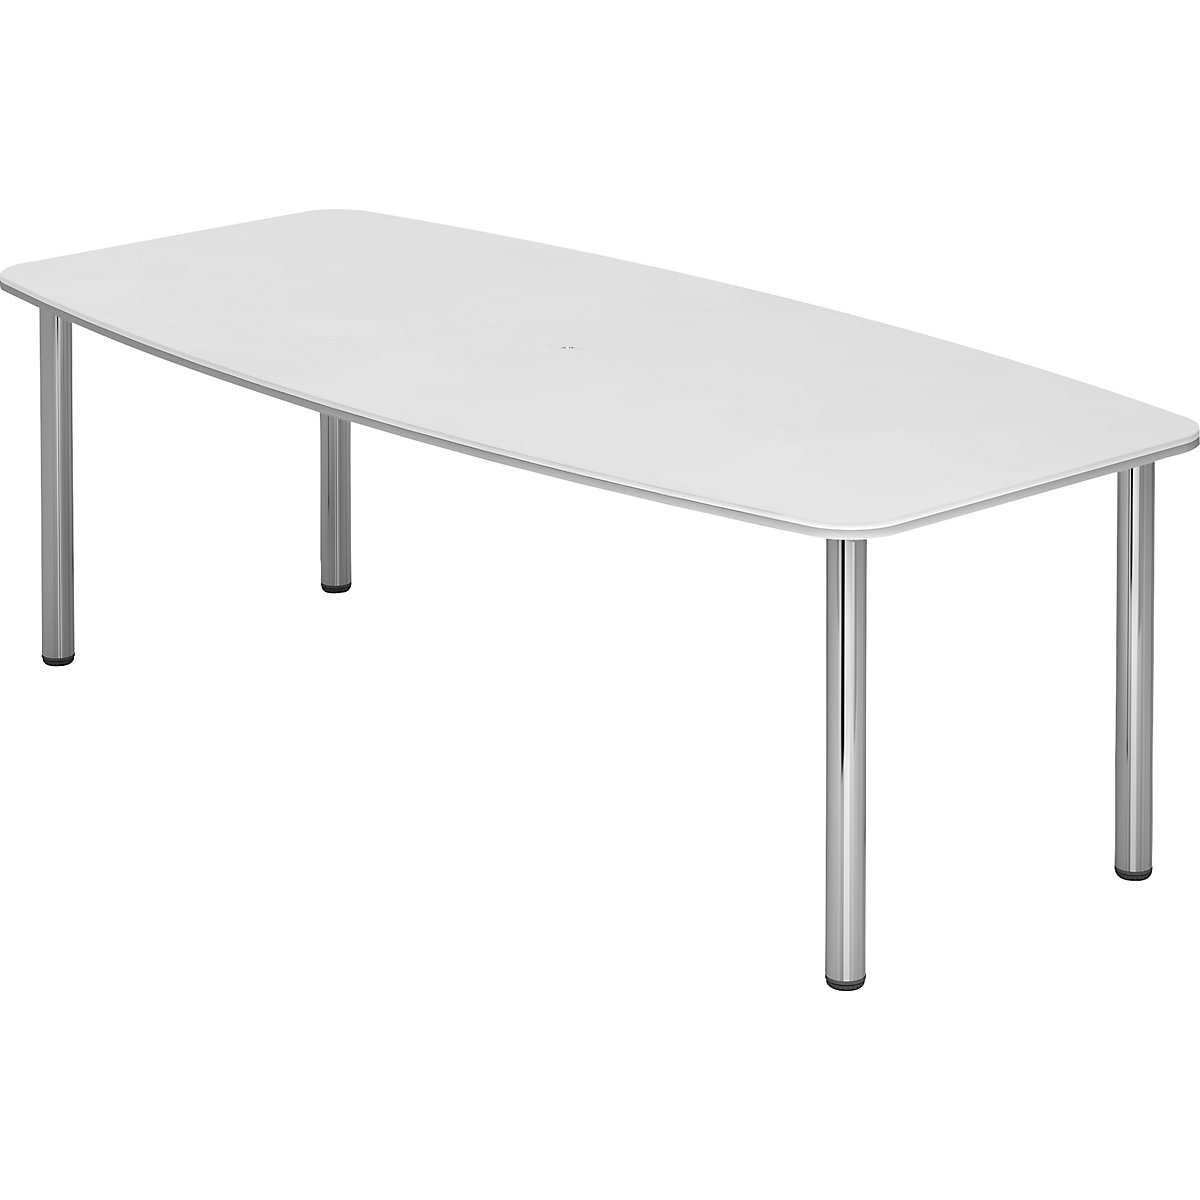 Conference table, frame with round tubular legs, for 8 people, white-5